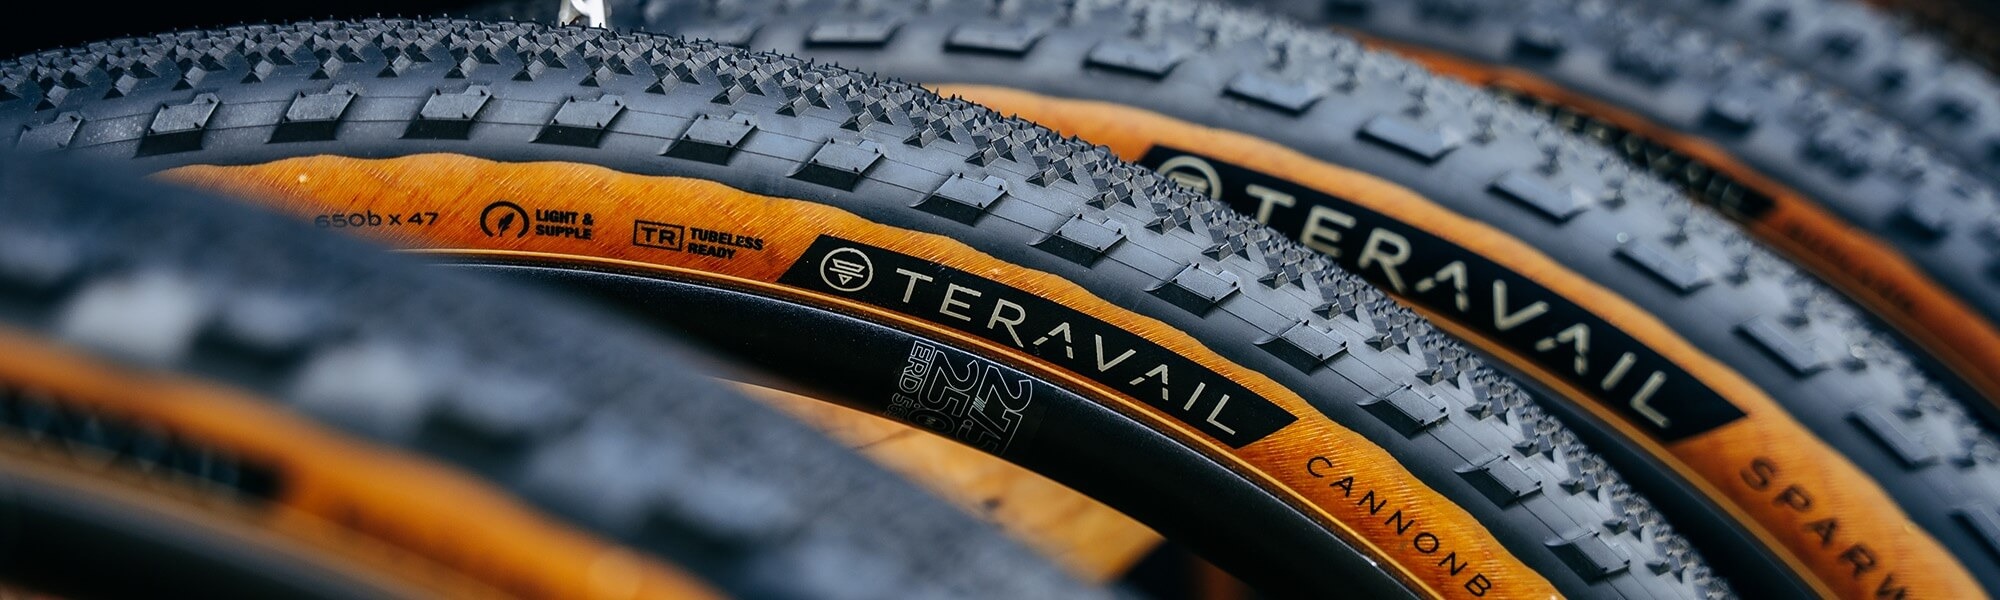 Closeup view of several bike wheels with Teravail tires on the rims with tan sidewalls